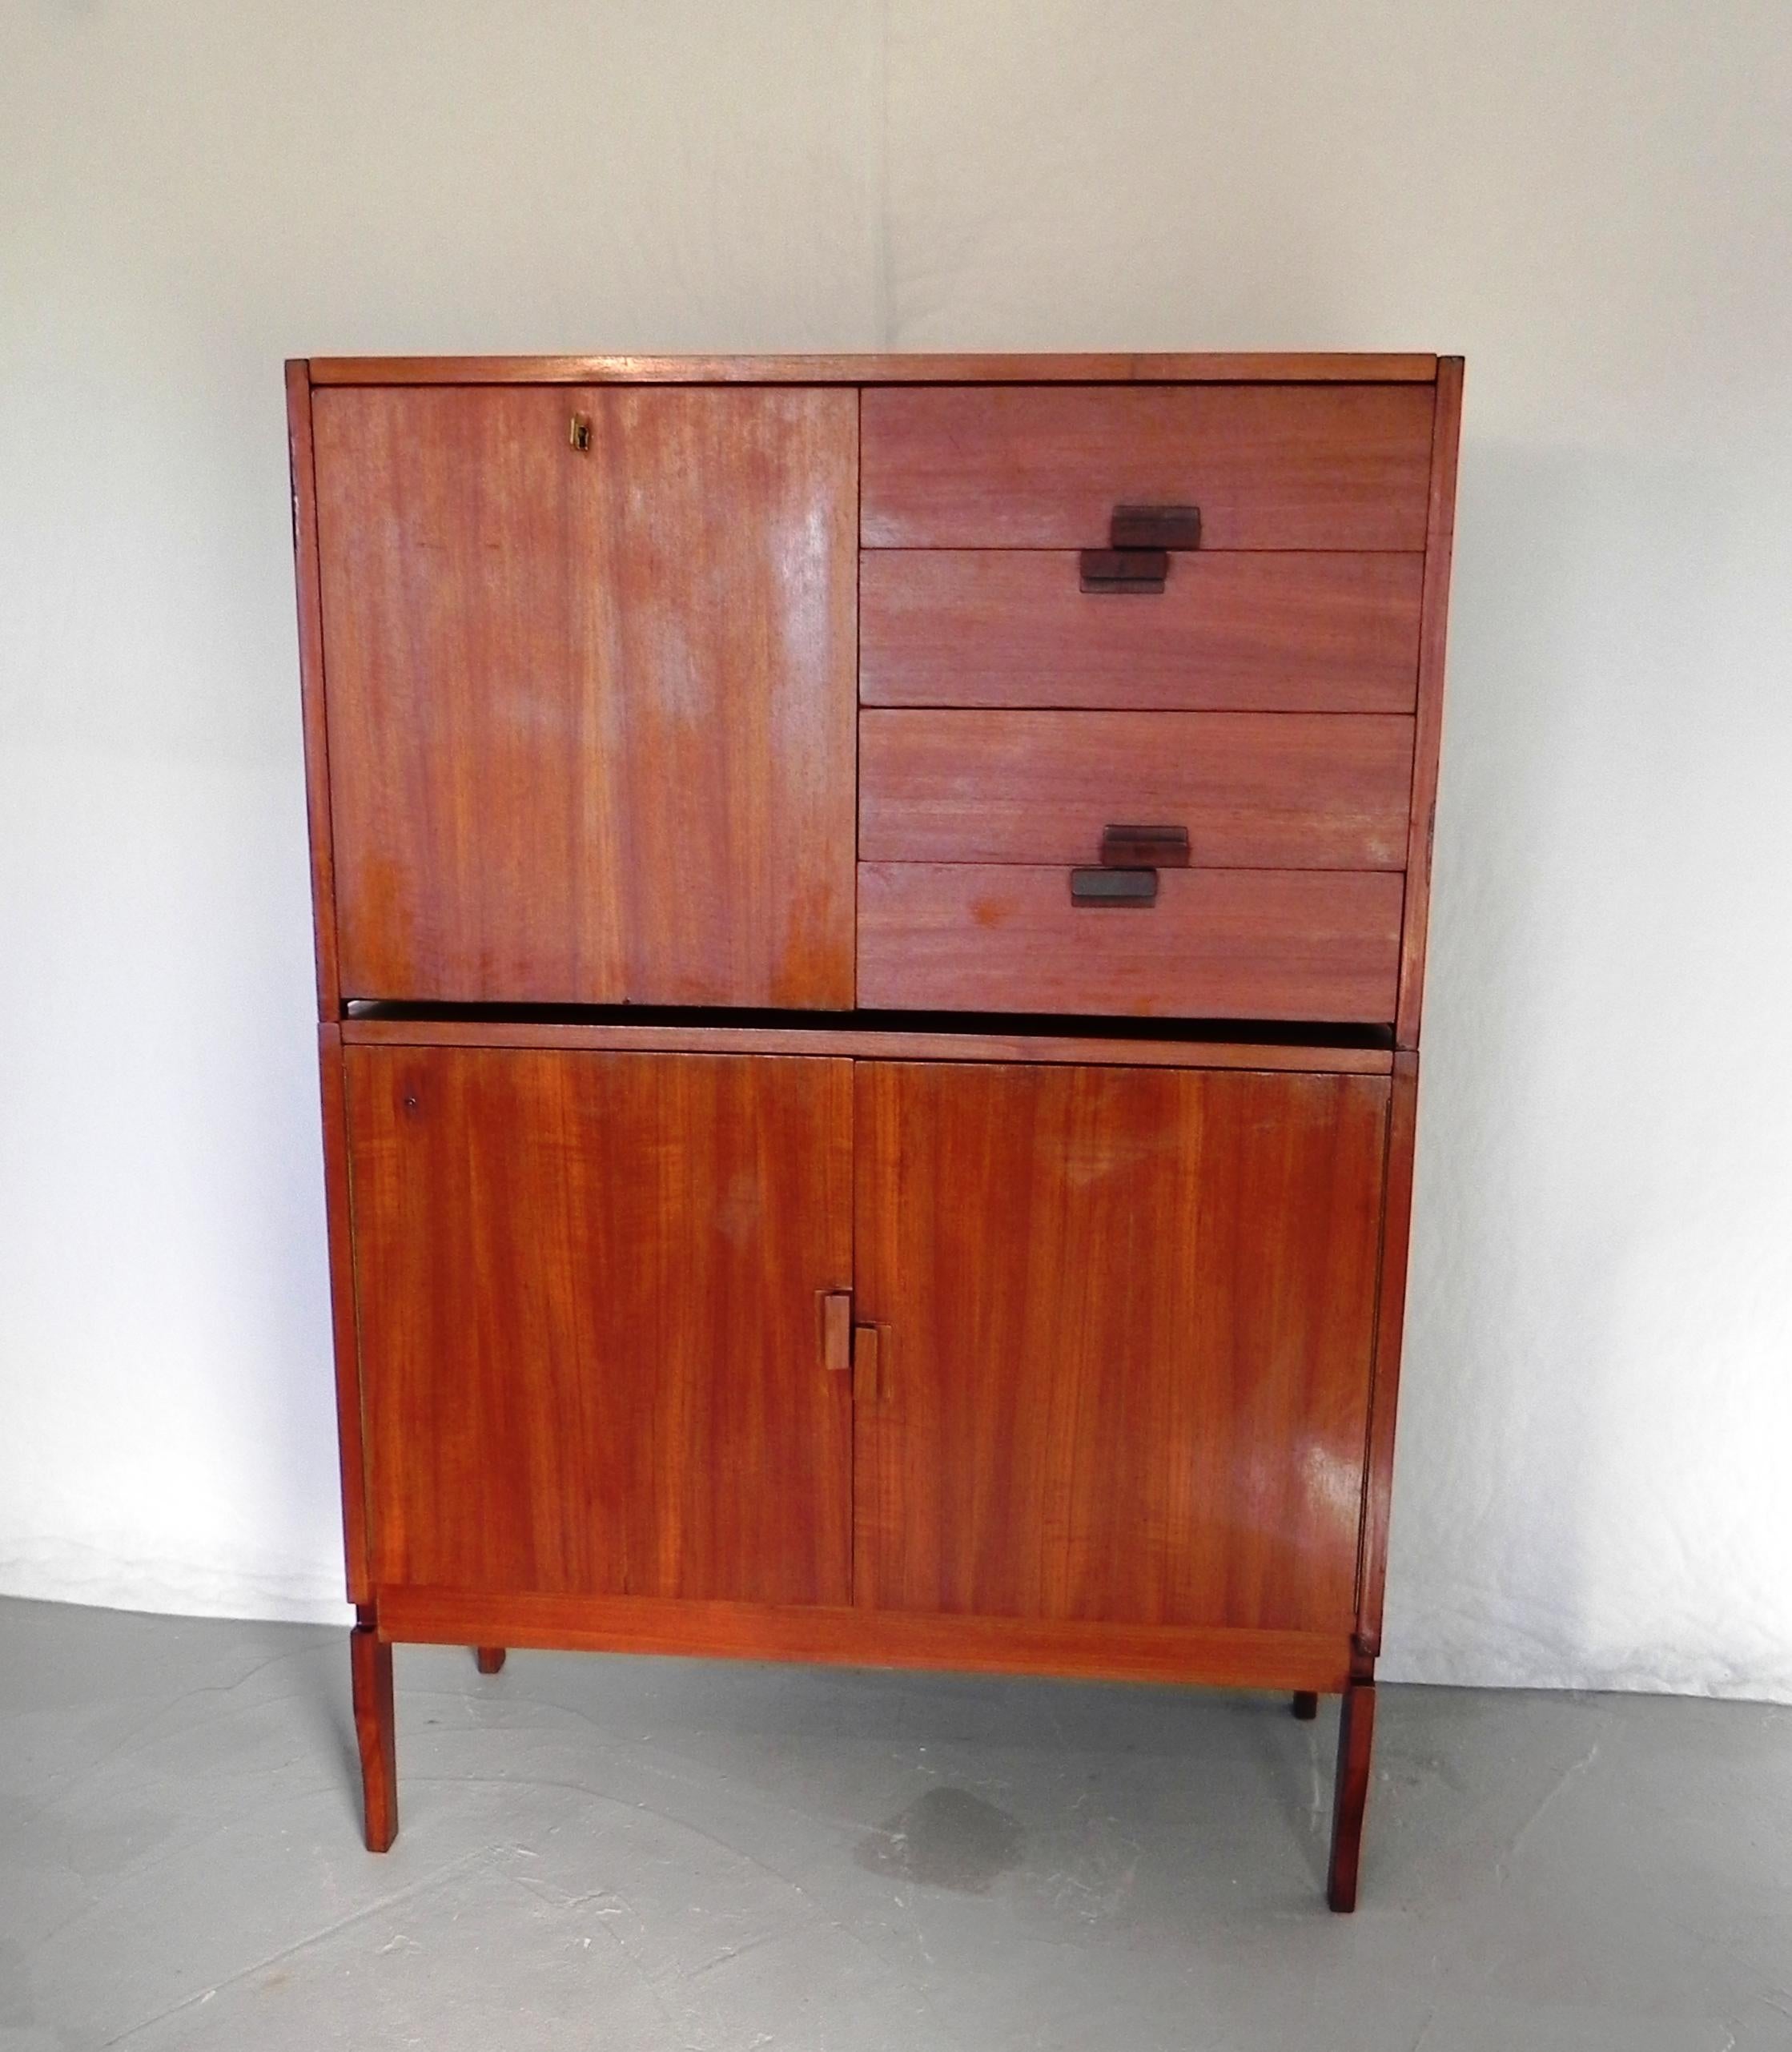 mahogany credenza /madia, 1960s. this is a modular piece of furniture modular in various configurations. structure made of mahogany-covered plywood. can also be used double-sided. very carefully designed and made. handles are solid wood and form a